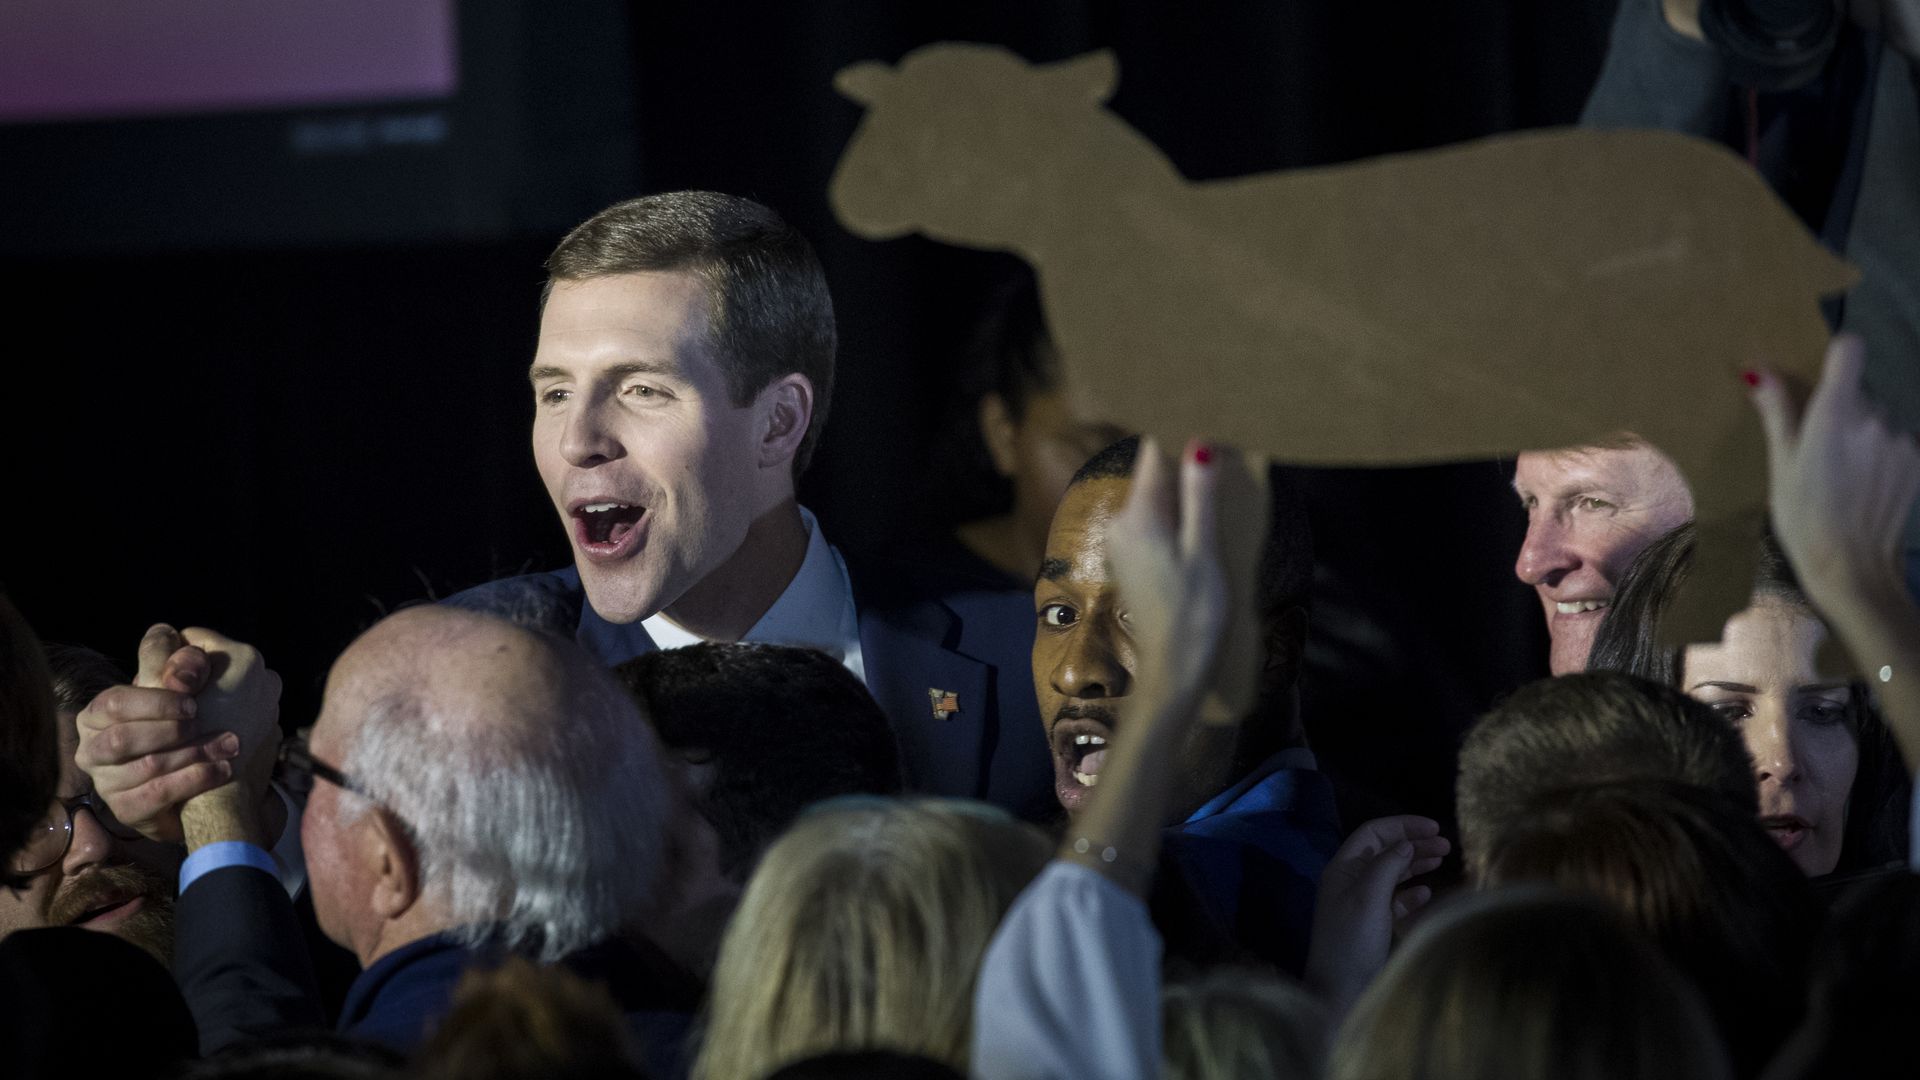 Conor Lamb election night party